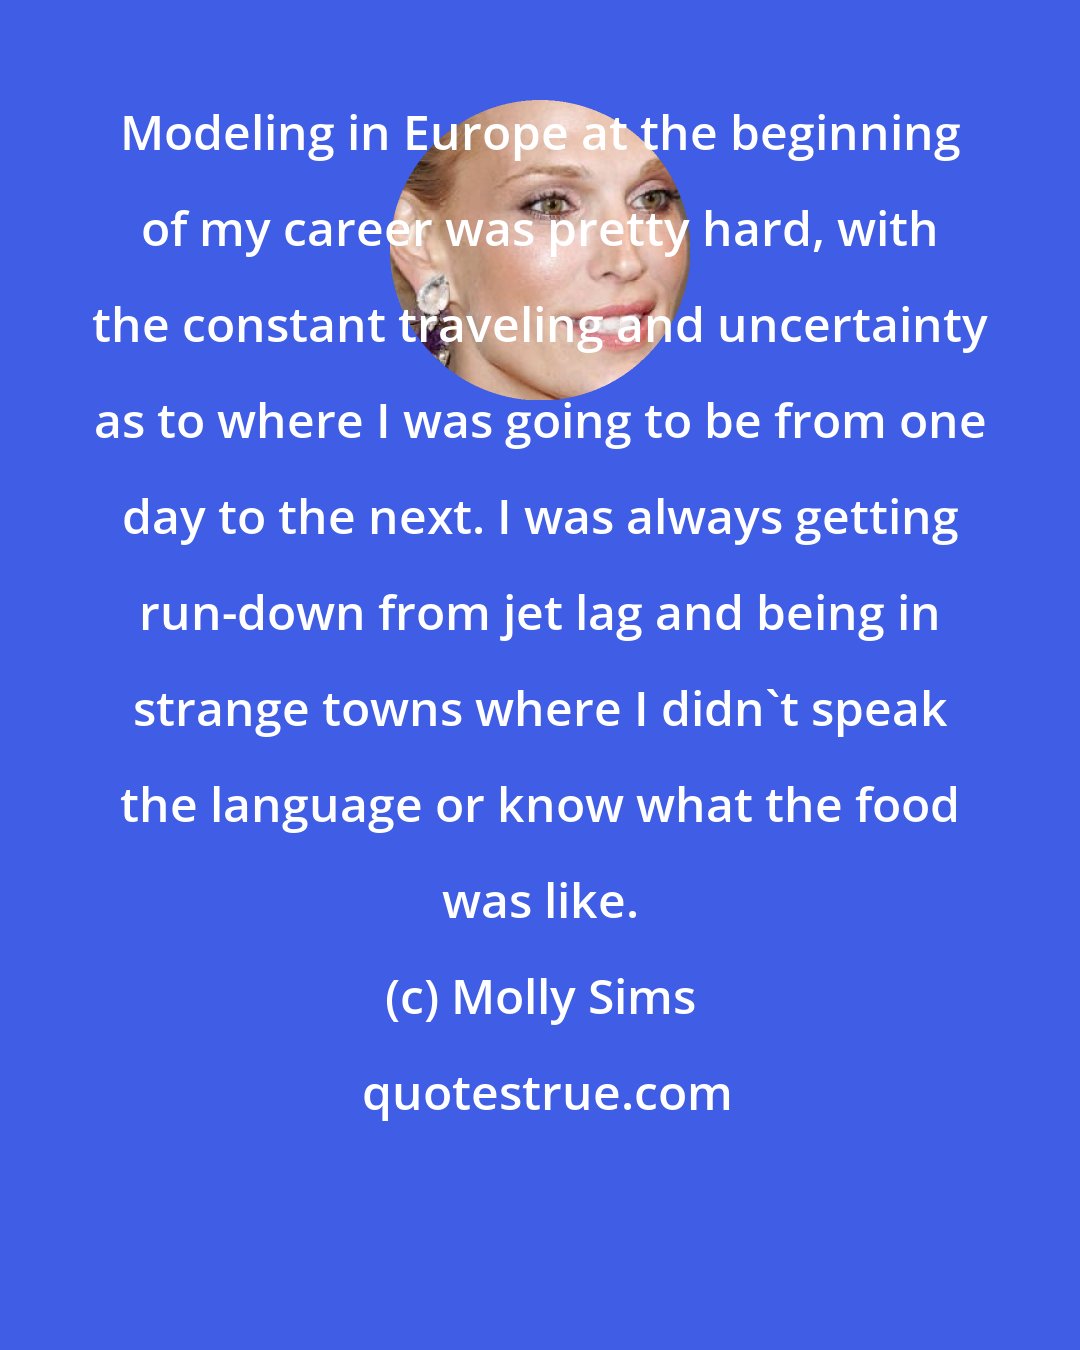 Molly Sims: Modeling in Europe at the beginning of my career was pretty hard, with the constant traveling and uncertainty as to where I was going to be from one day to the next. I was always getting run-down from jet lag and being in strange towns where I didn't speak the language or know what the food was like.